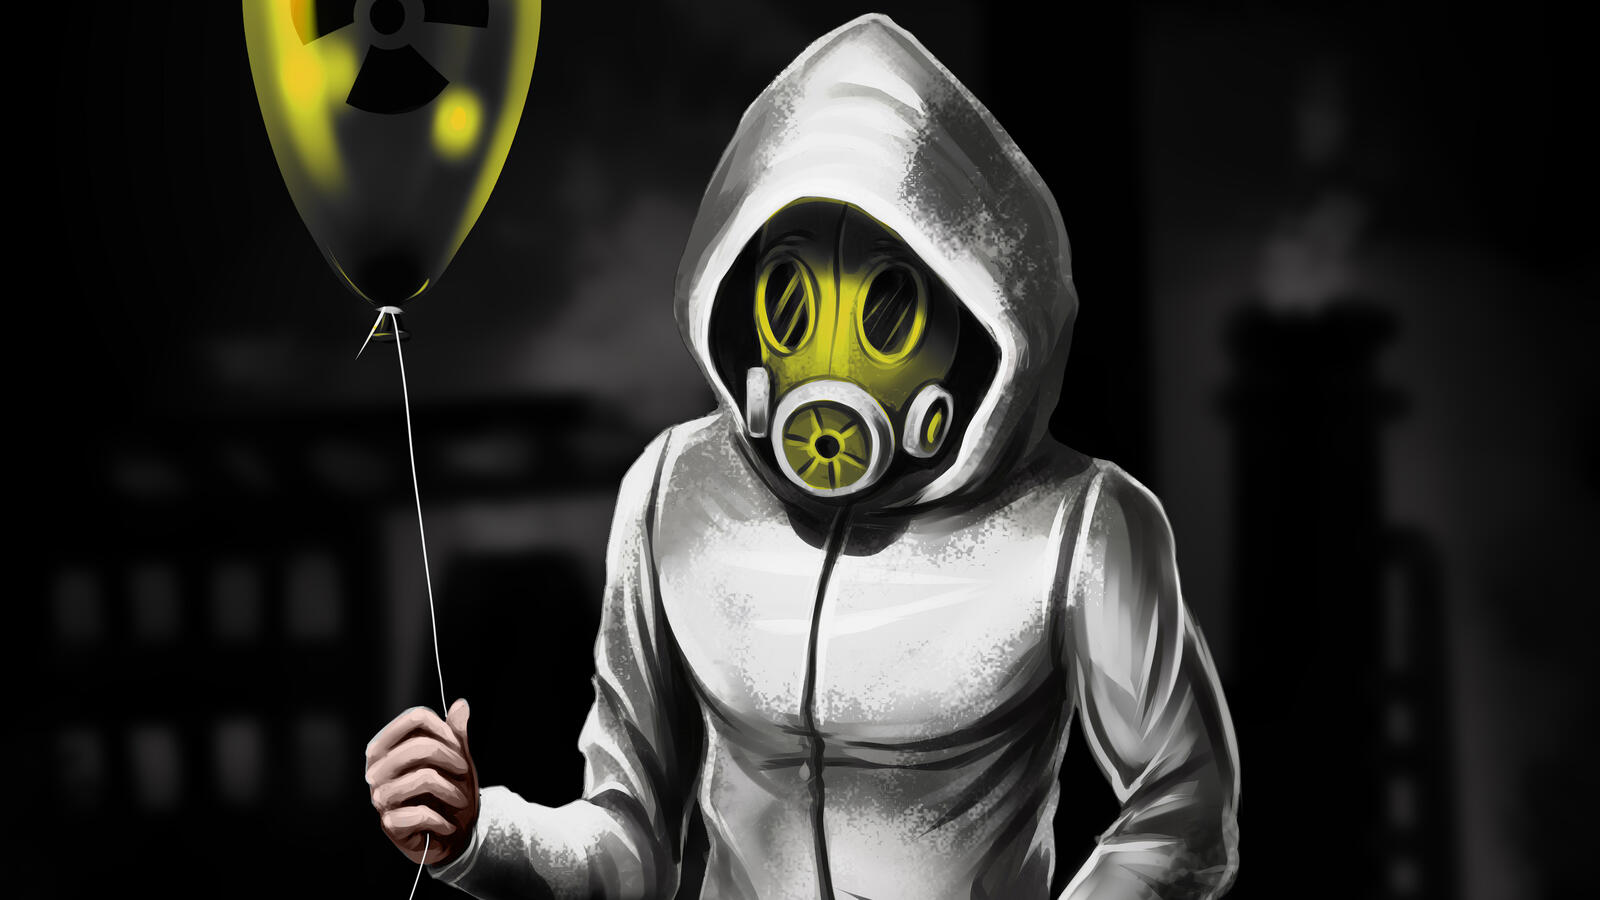 Free photo Drawing of a man wearing a white hooded sweatshirt and gas mask with a yellow balloon in his hands